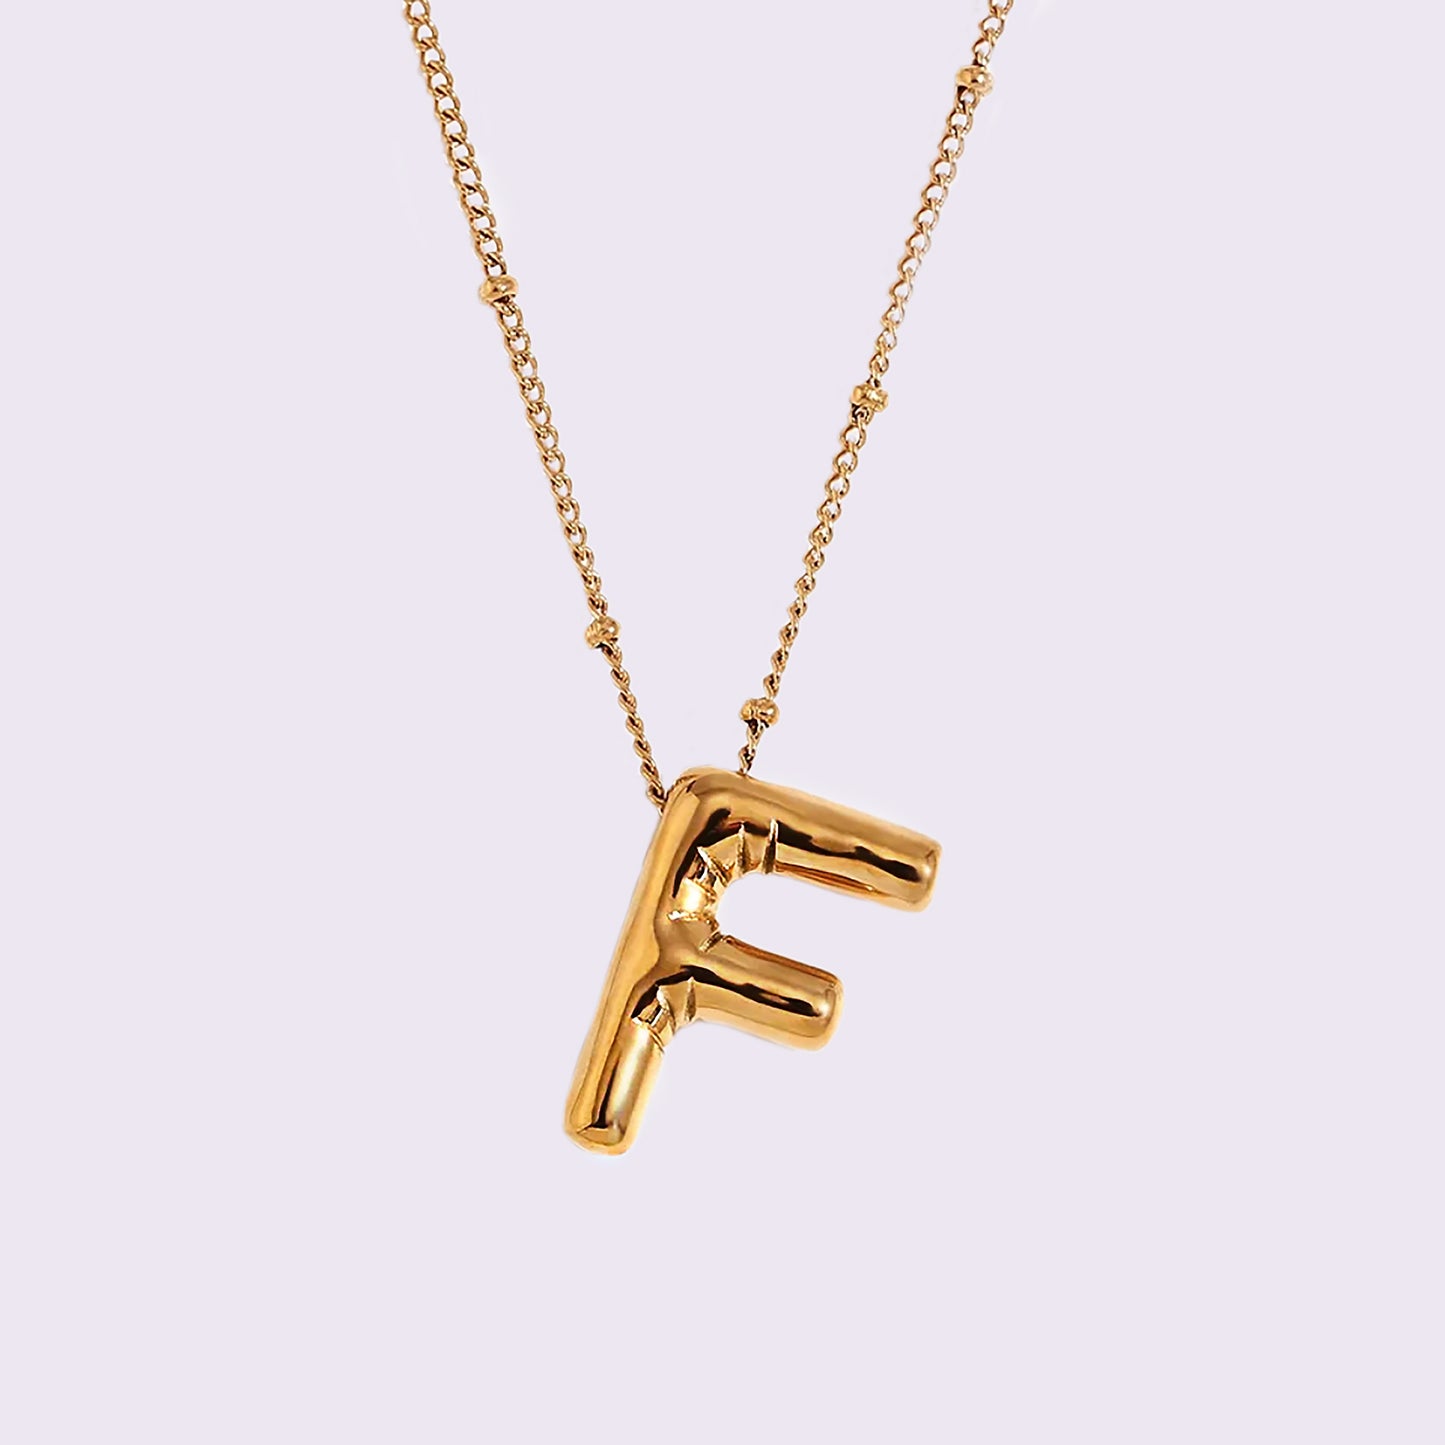 VB 3D Balloon Letter Necklace 18K Gold Plated.